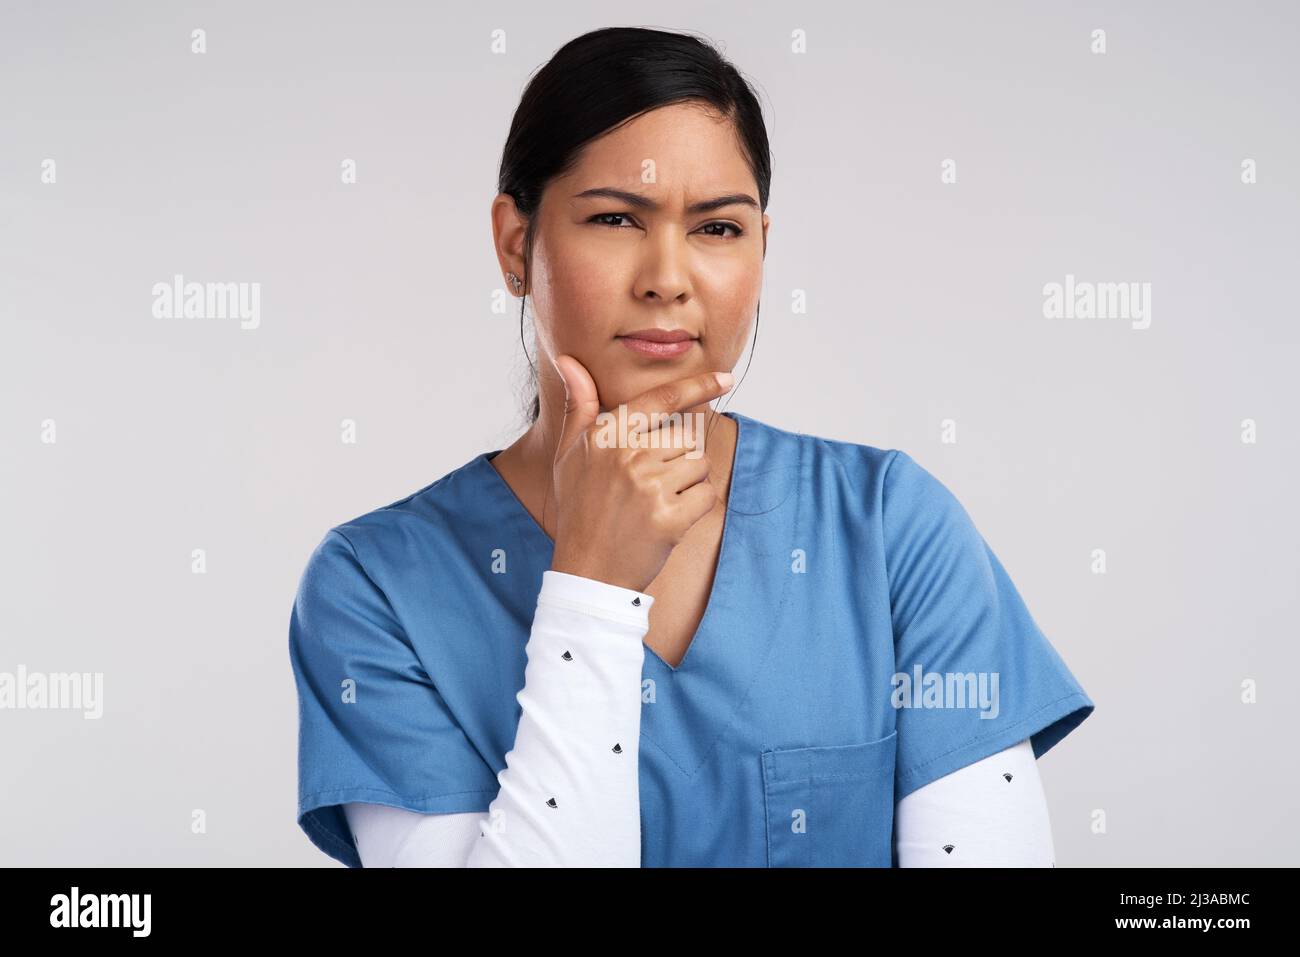 Bring your best wounds, dress them up just for you. Portrait of a young beautiful doctor deep in thought against a white background. Stock Photo